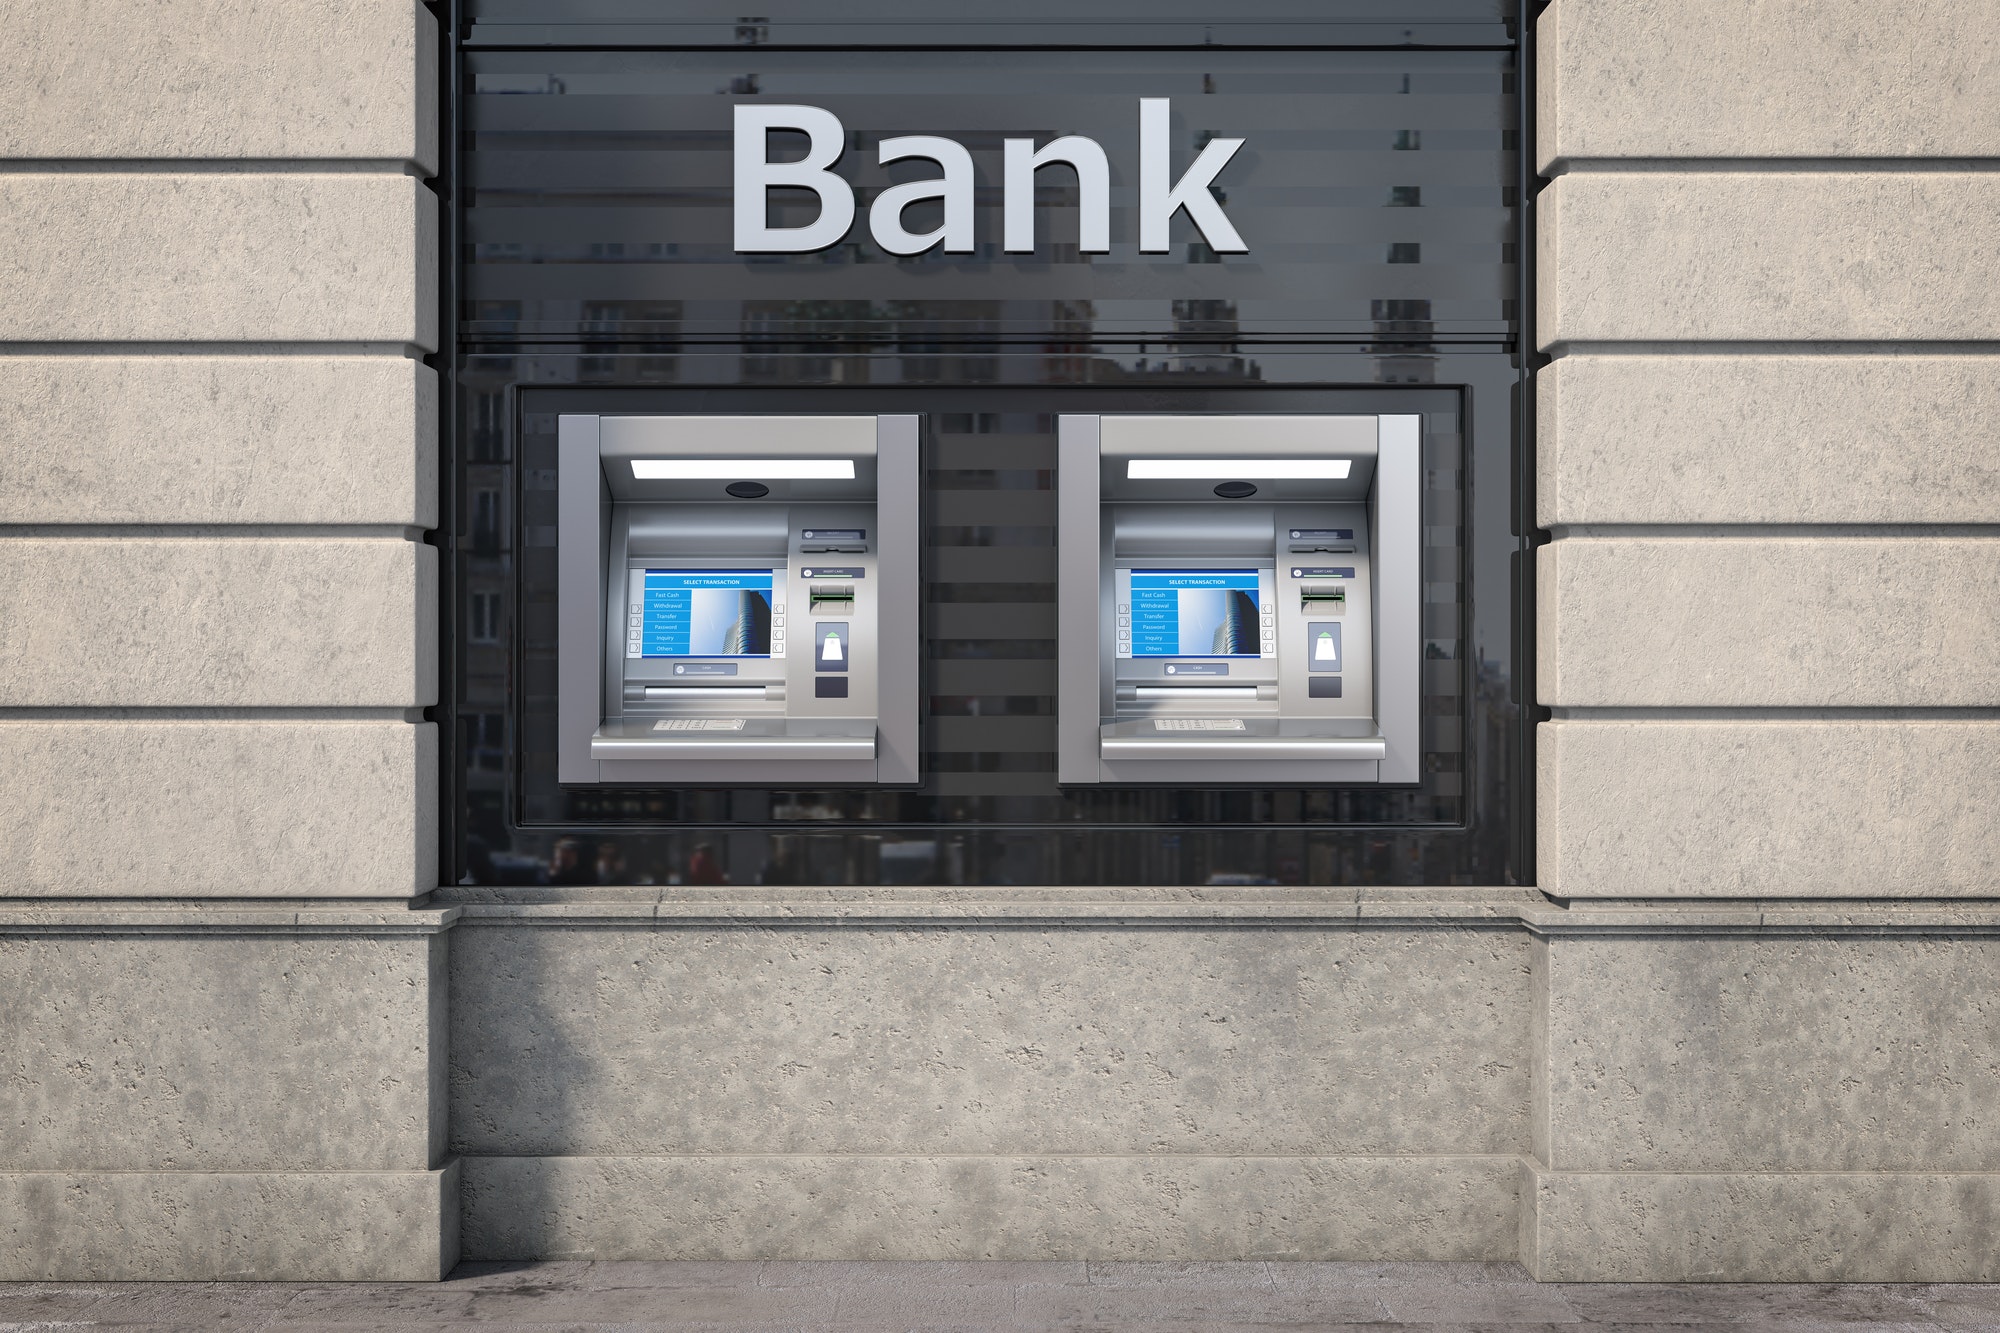 Bank ATM automatic teller machines for money withdrawing. The s